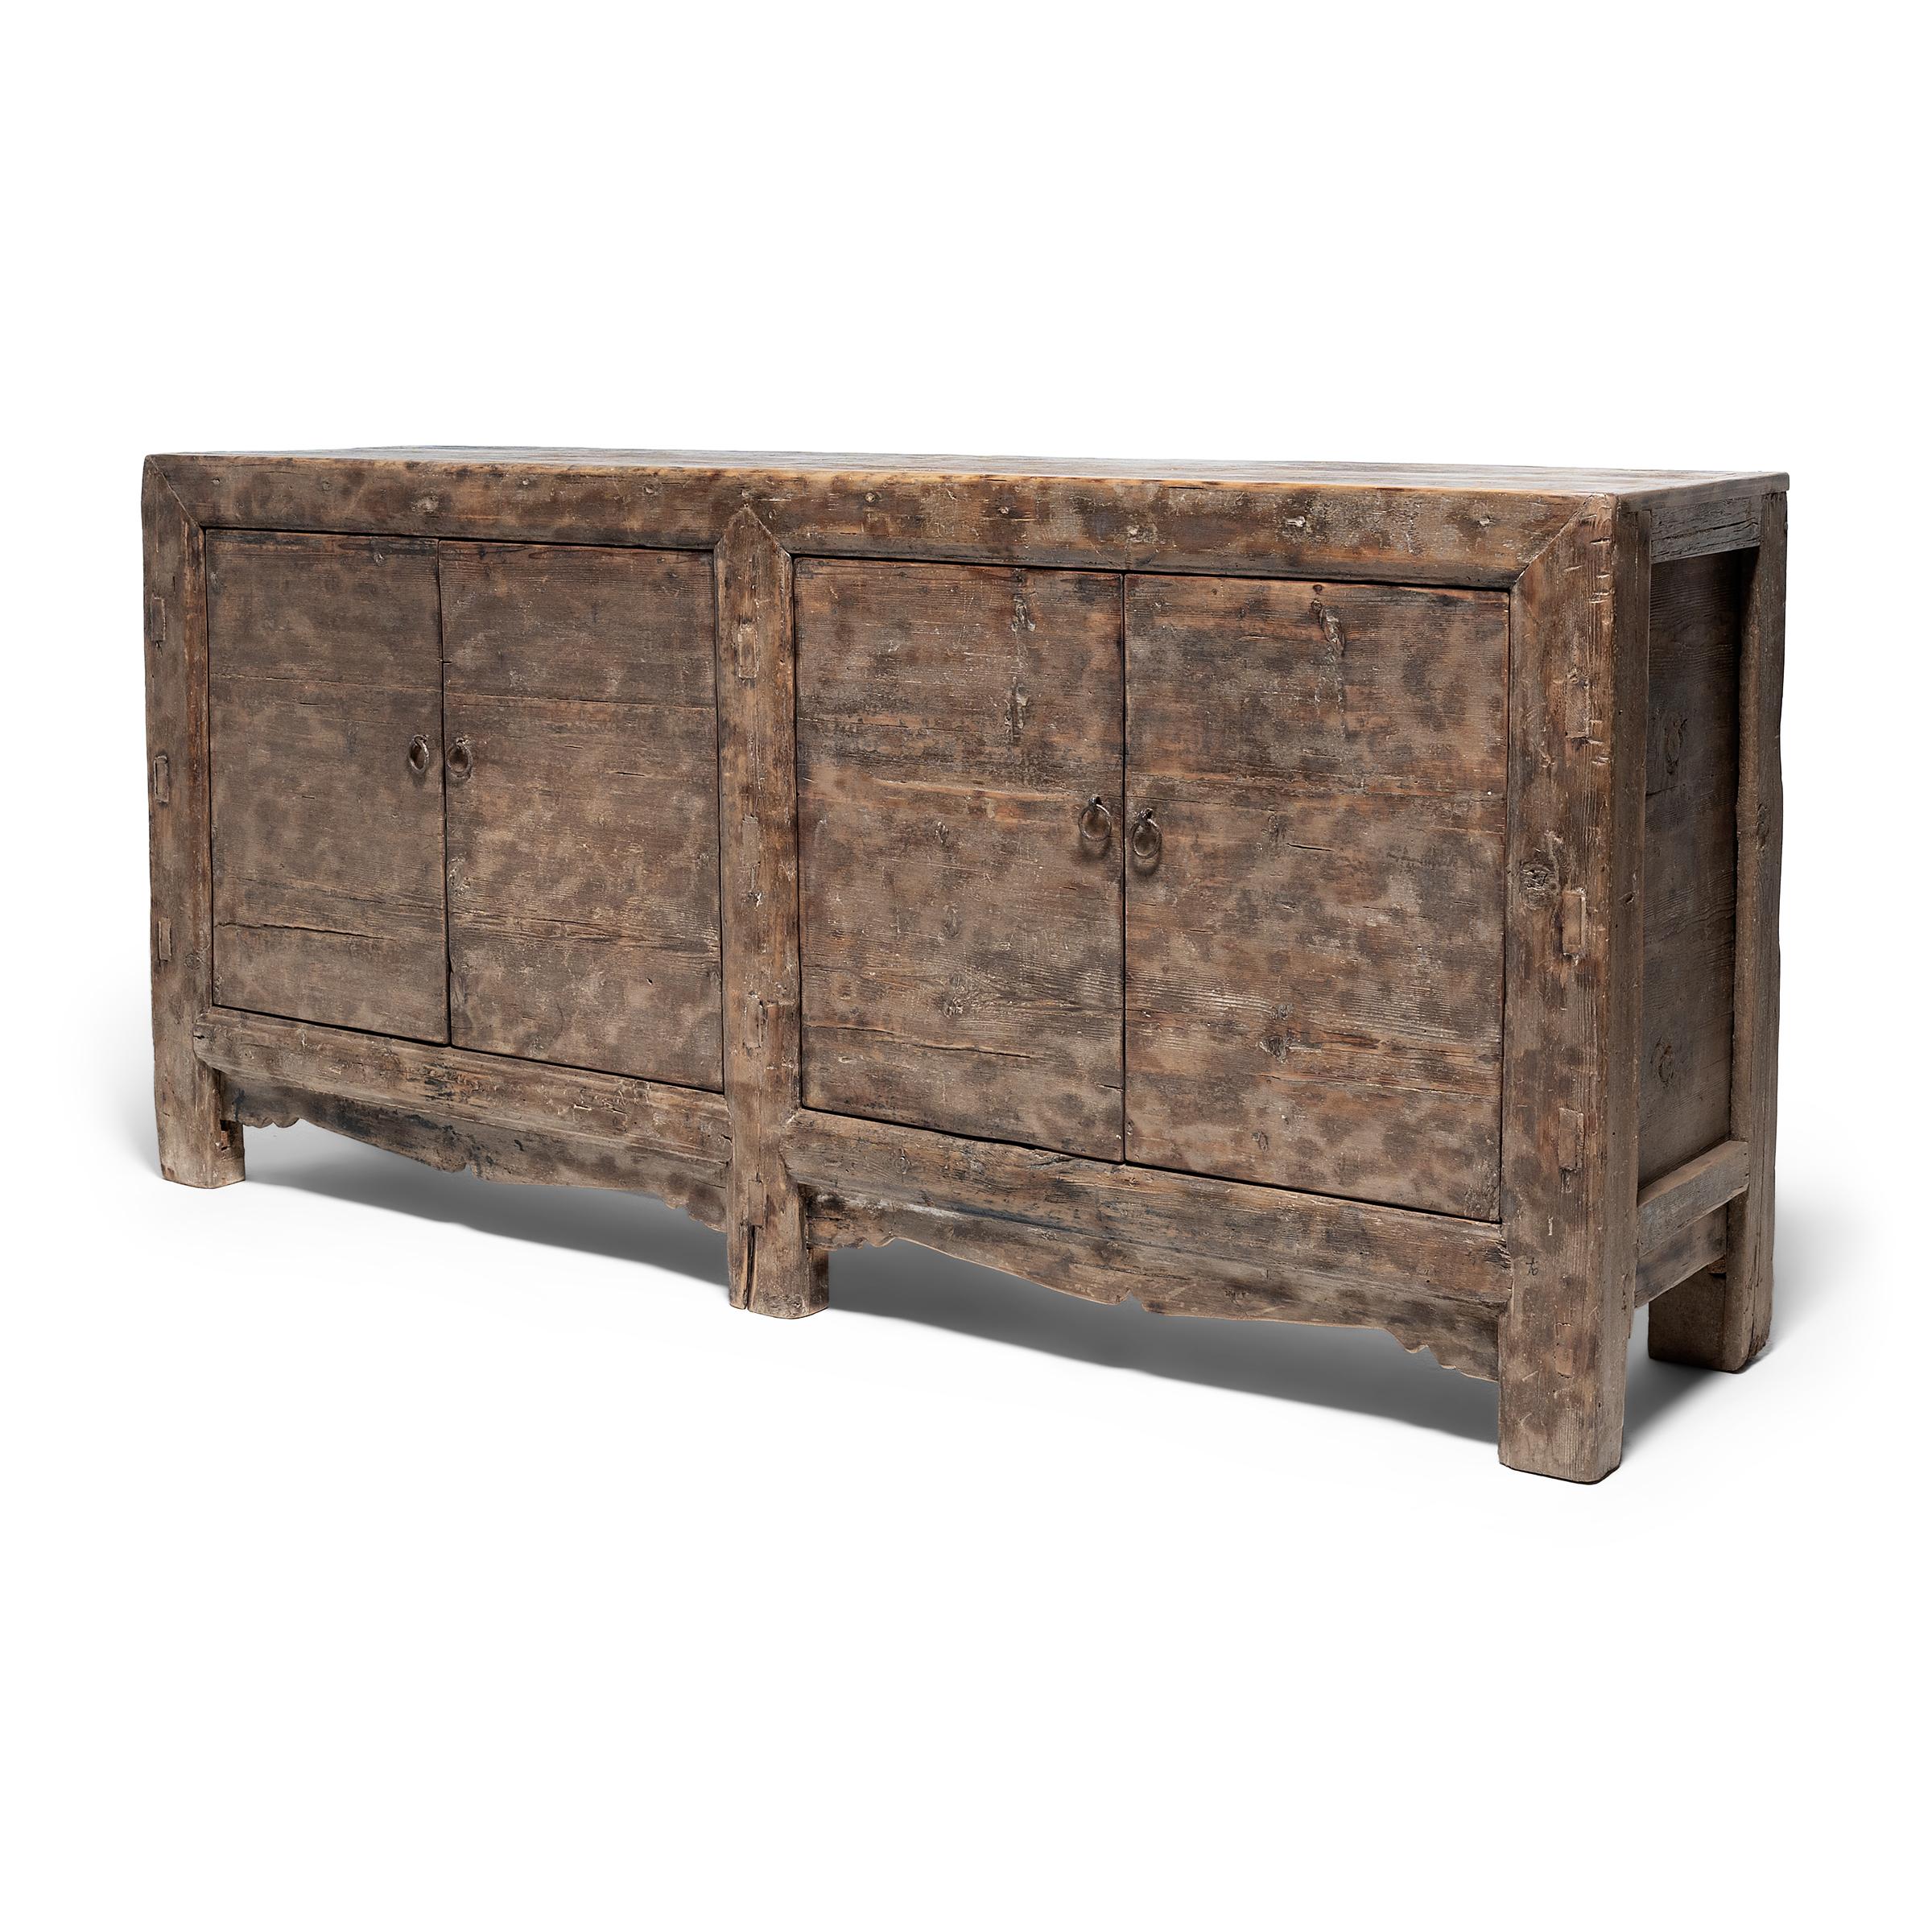 Created in the style of Mongolian storage coffers, this late 19th-century herdsman's chest has a minimalist design and plenty of rustic appeal. Originally configured to open from the top, this chest was modified with front-facing doors by our